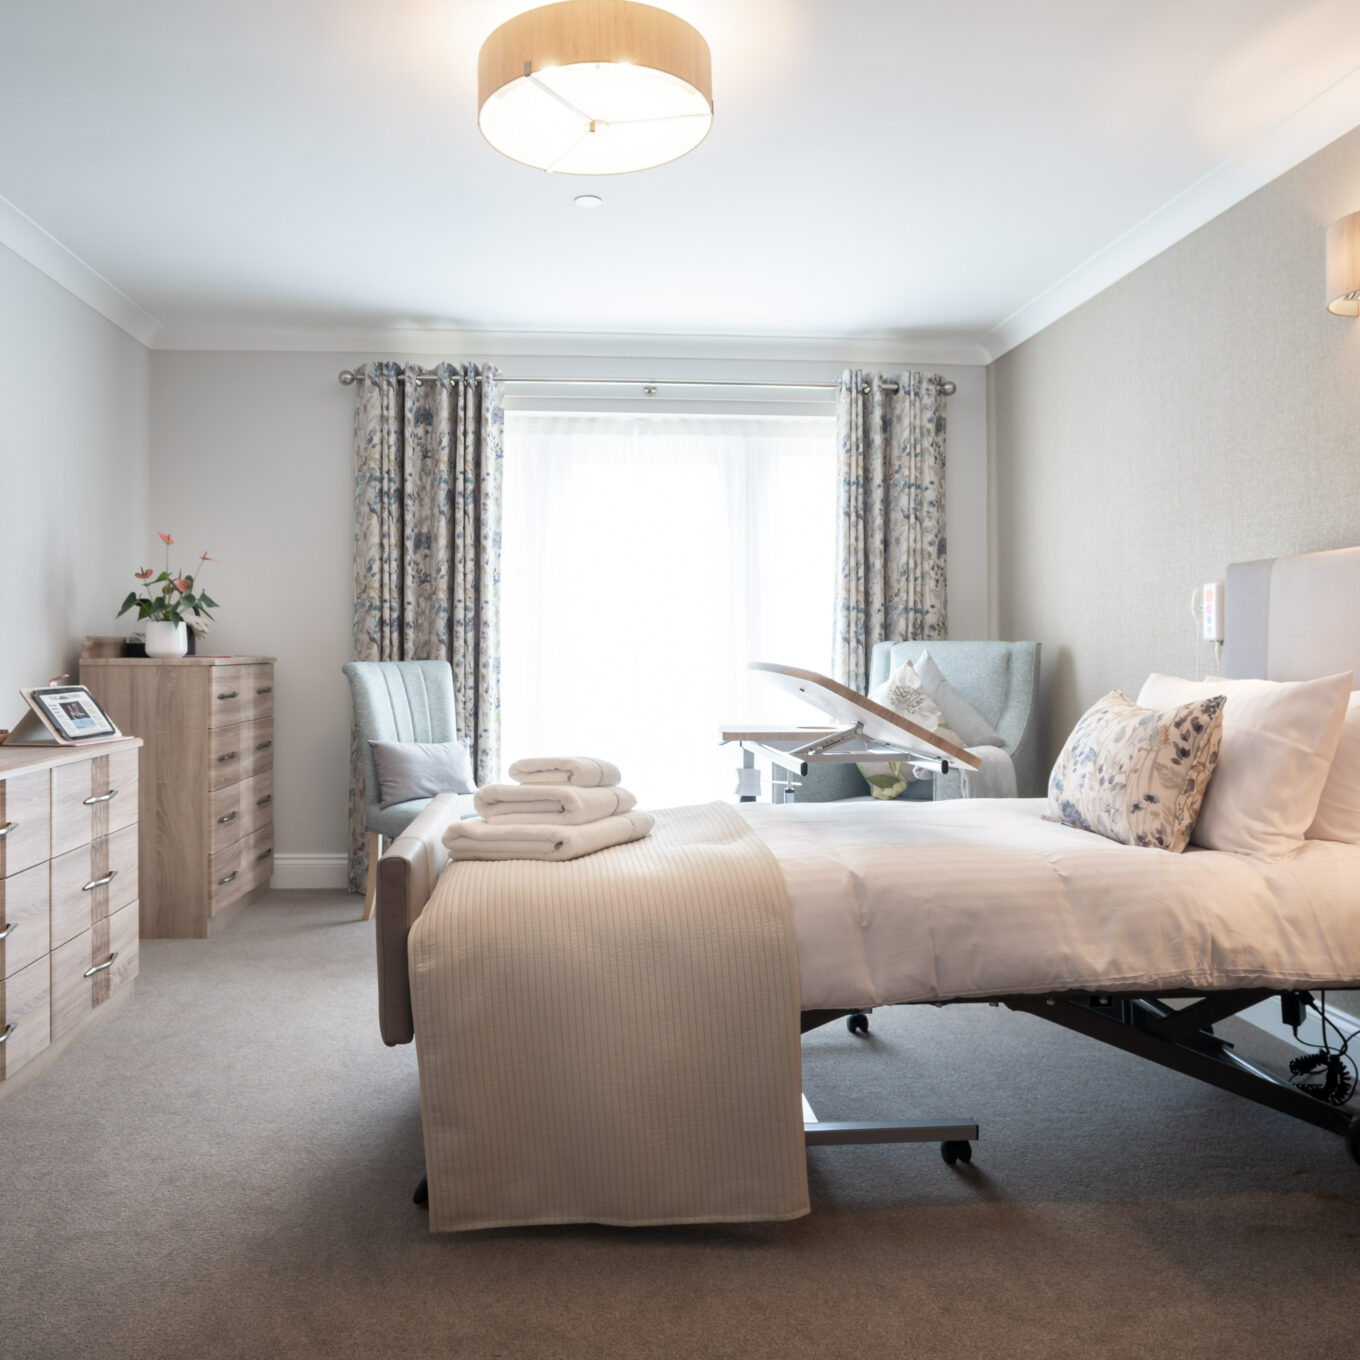 Premium bedroom at Elmbook Court Care Home in Oxfordshire